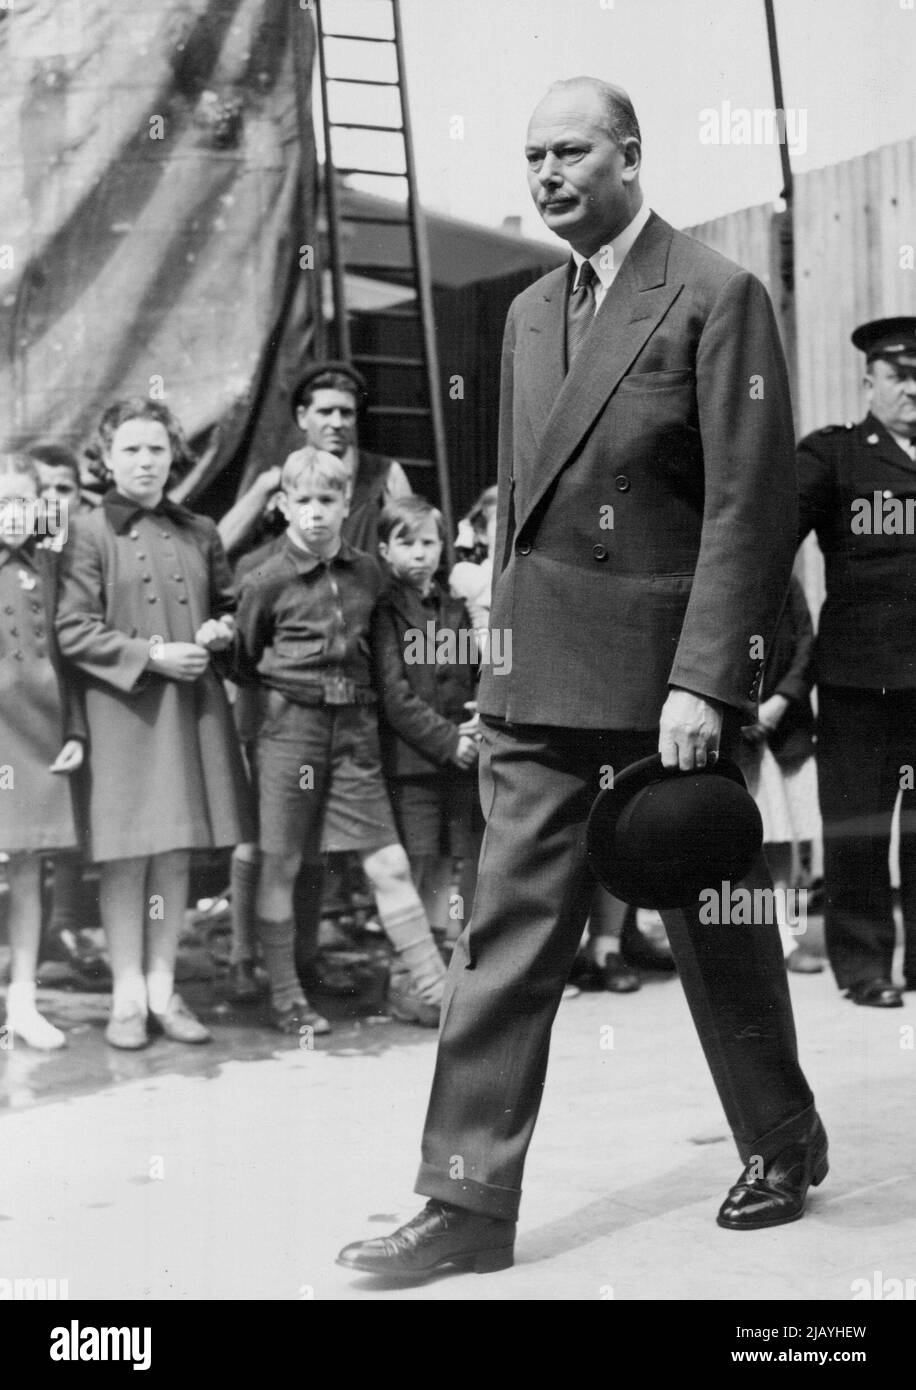 Today's Rehearsal for the Coronation -- The Duke of Gloucester leaving Westminster Abbey after today's Coronation rehearsal. Yet another rehearsal of various parts of the Coronation ceremony was held today in Westminster Abbey. May 21, 1953. (Photo by Fox Photos). Stock Photo